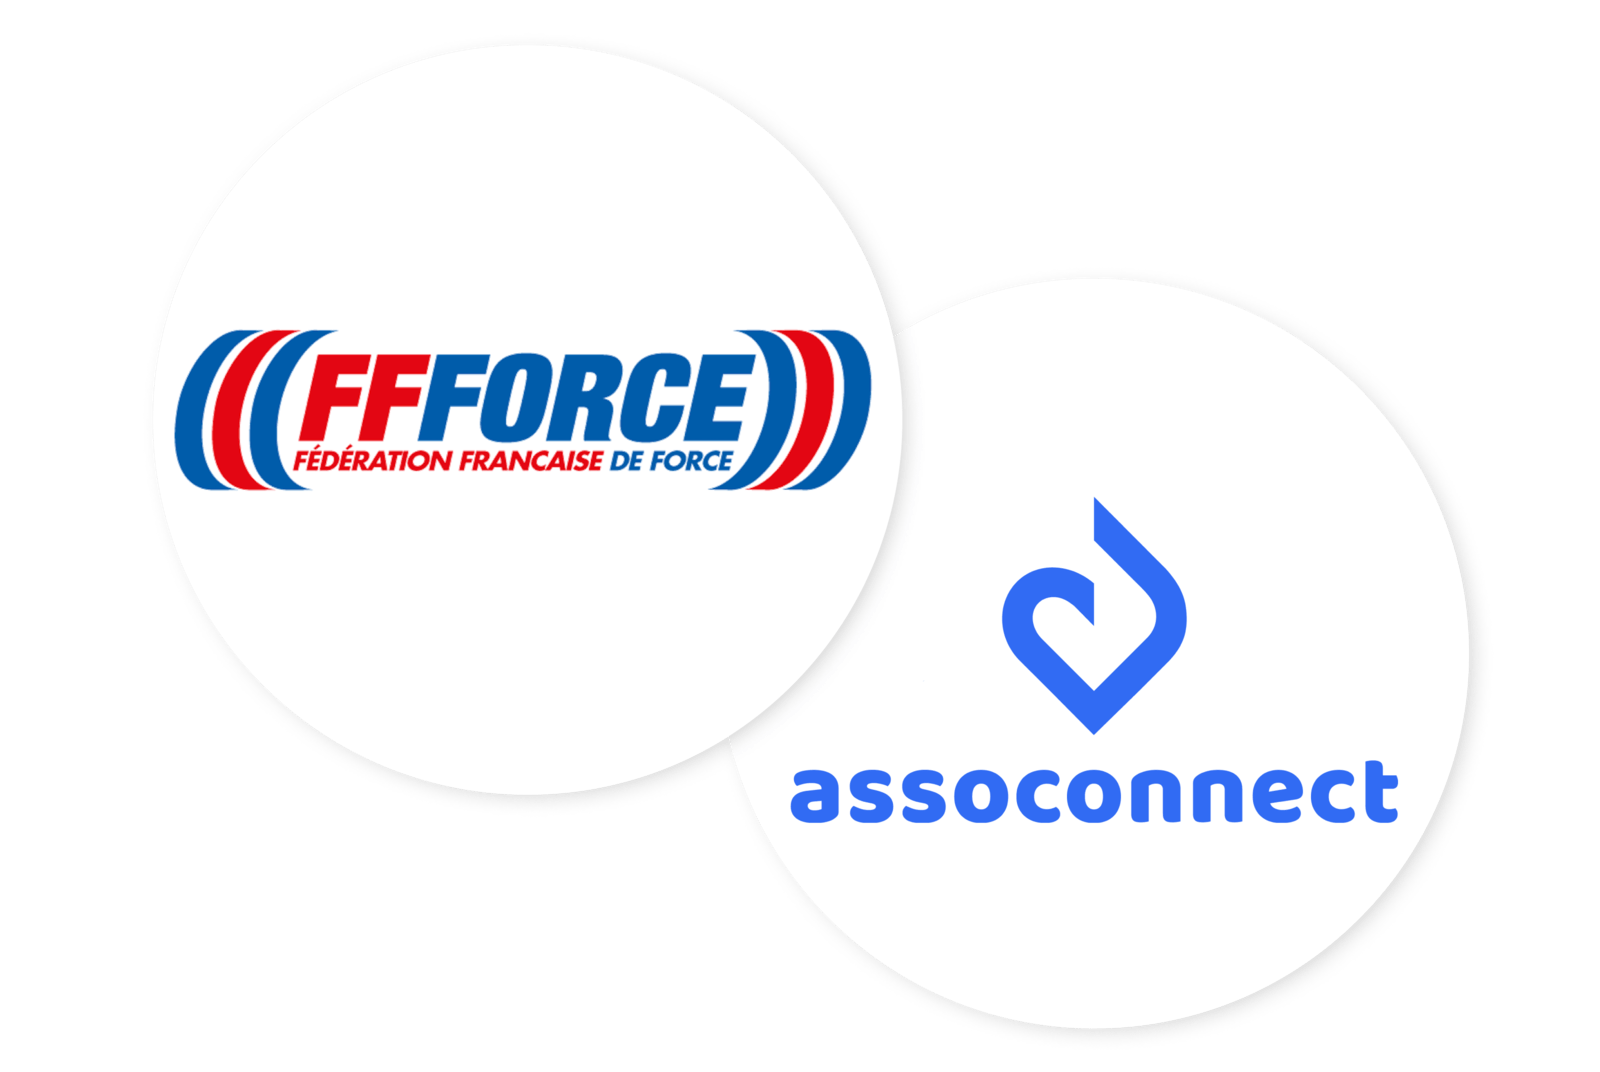 assoconnect-federation-francaise-force